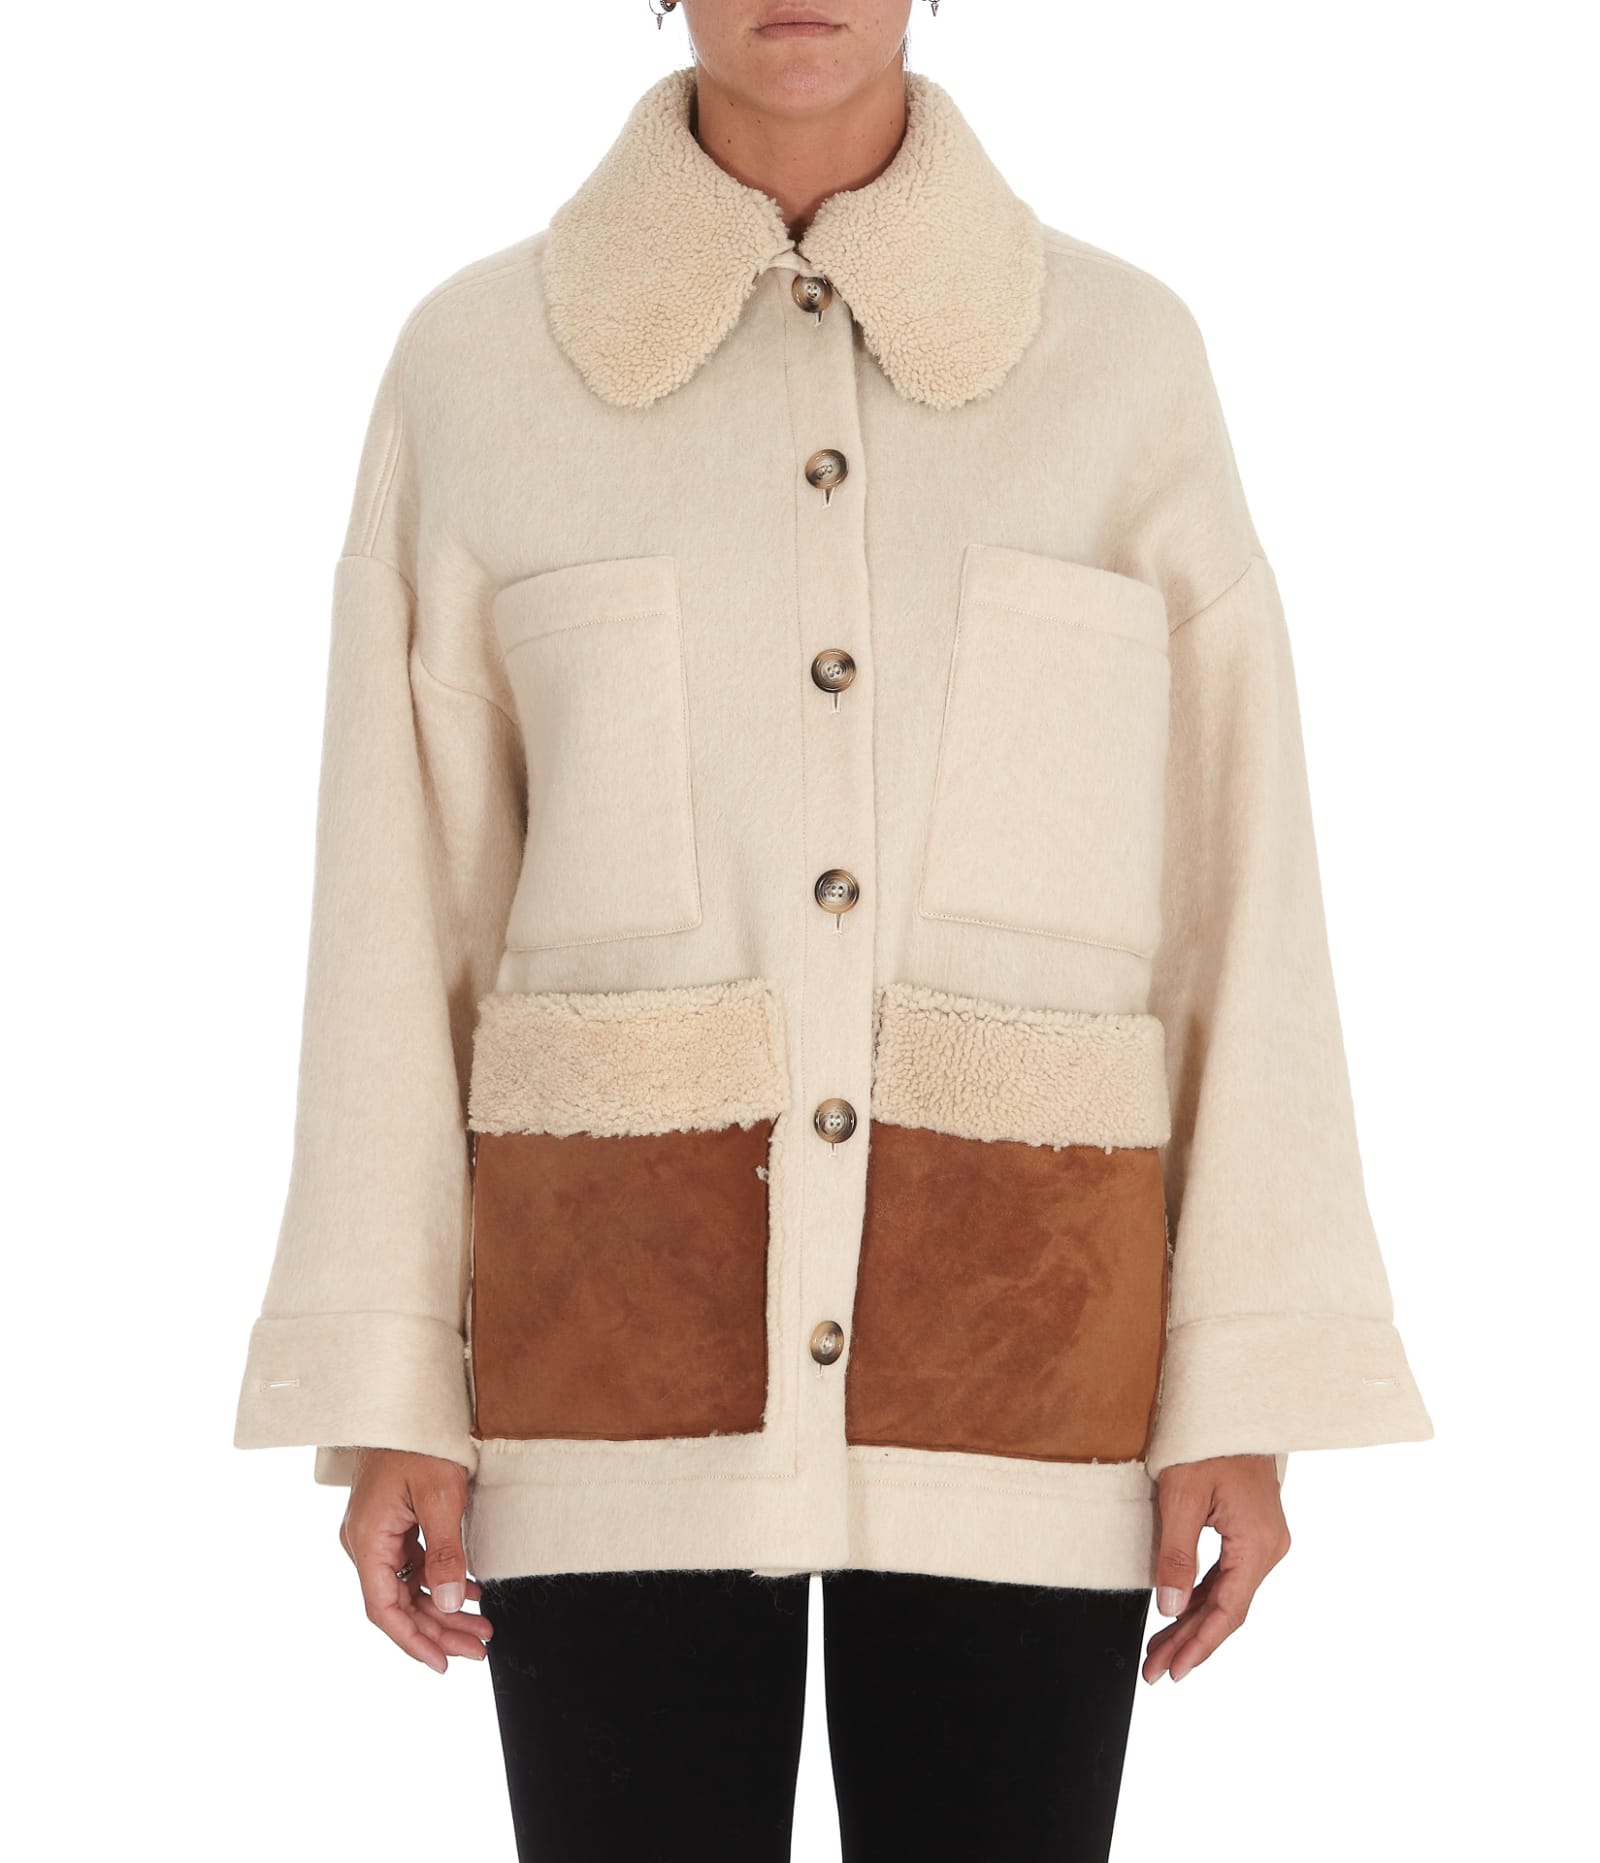 Photo of  Ava Adore Jacket Coat With Sheepskin Pockets And Collar- shop Ava Adore jackets online sales